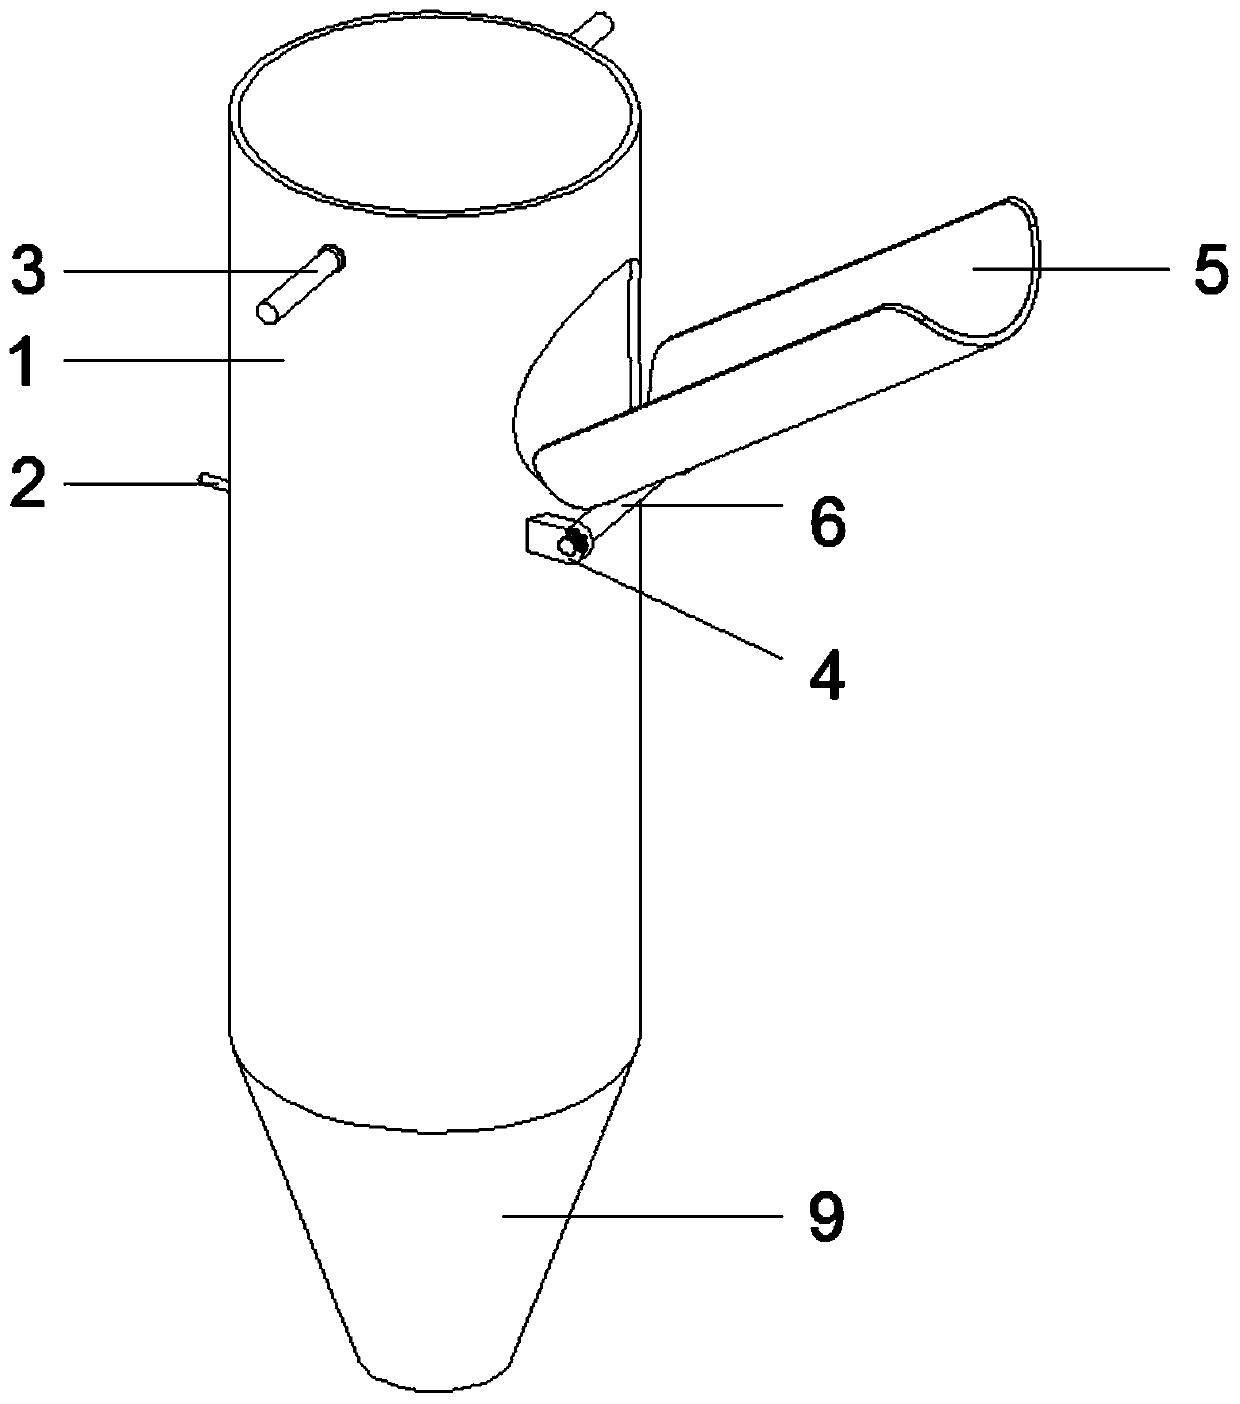 Garlic seed orientation device for garlic sowing